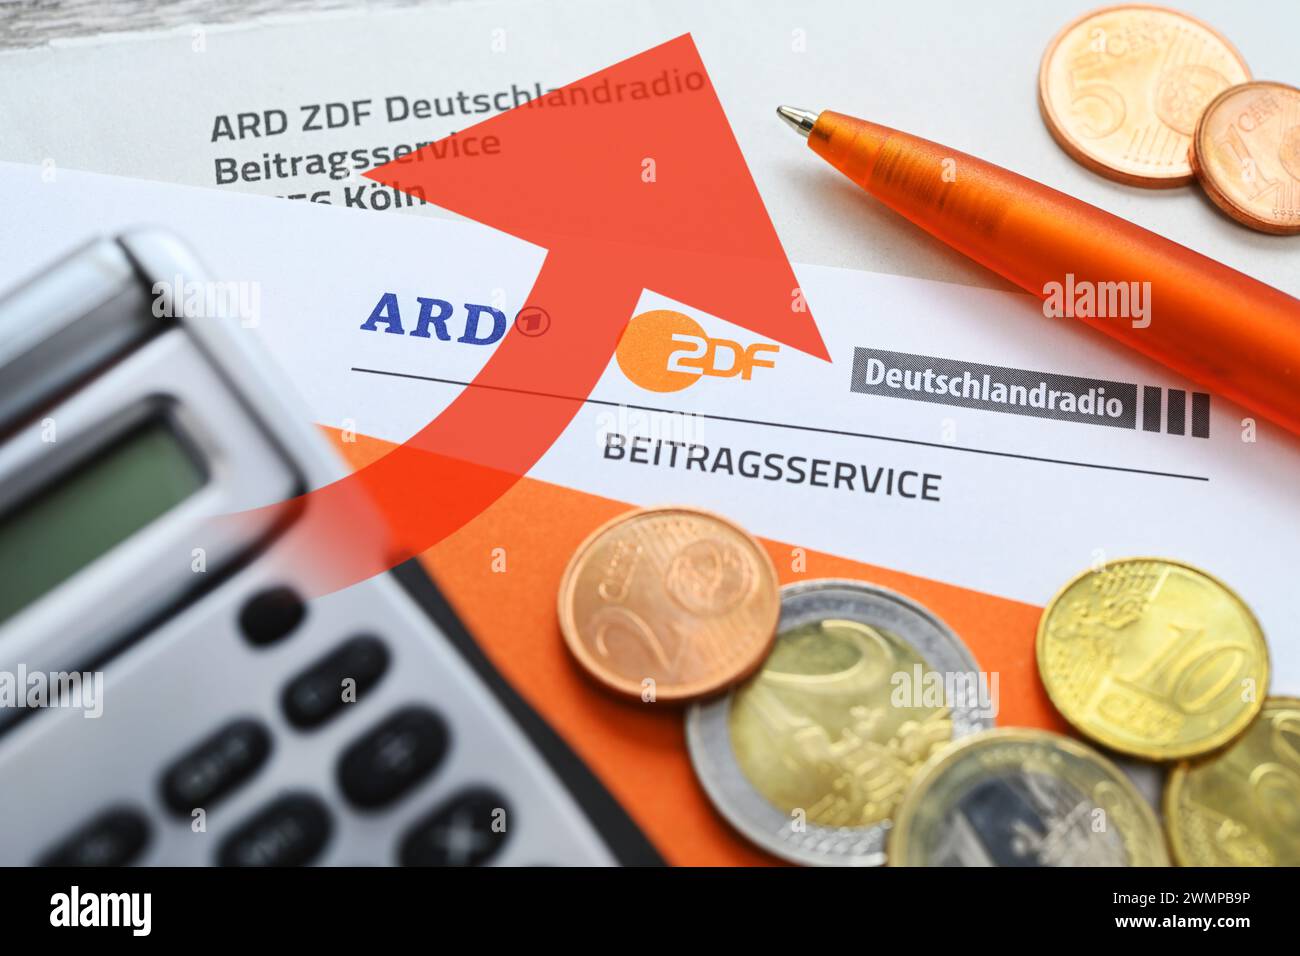 Letter From ARD ZDF Deutschlandradio Beitragsservice With Coins And Rising Arrow, Symbolic Photo Of The Increase In The Broadcasting Fee, Photomontage Stock Photo